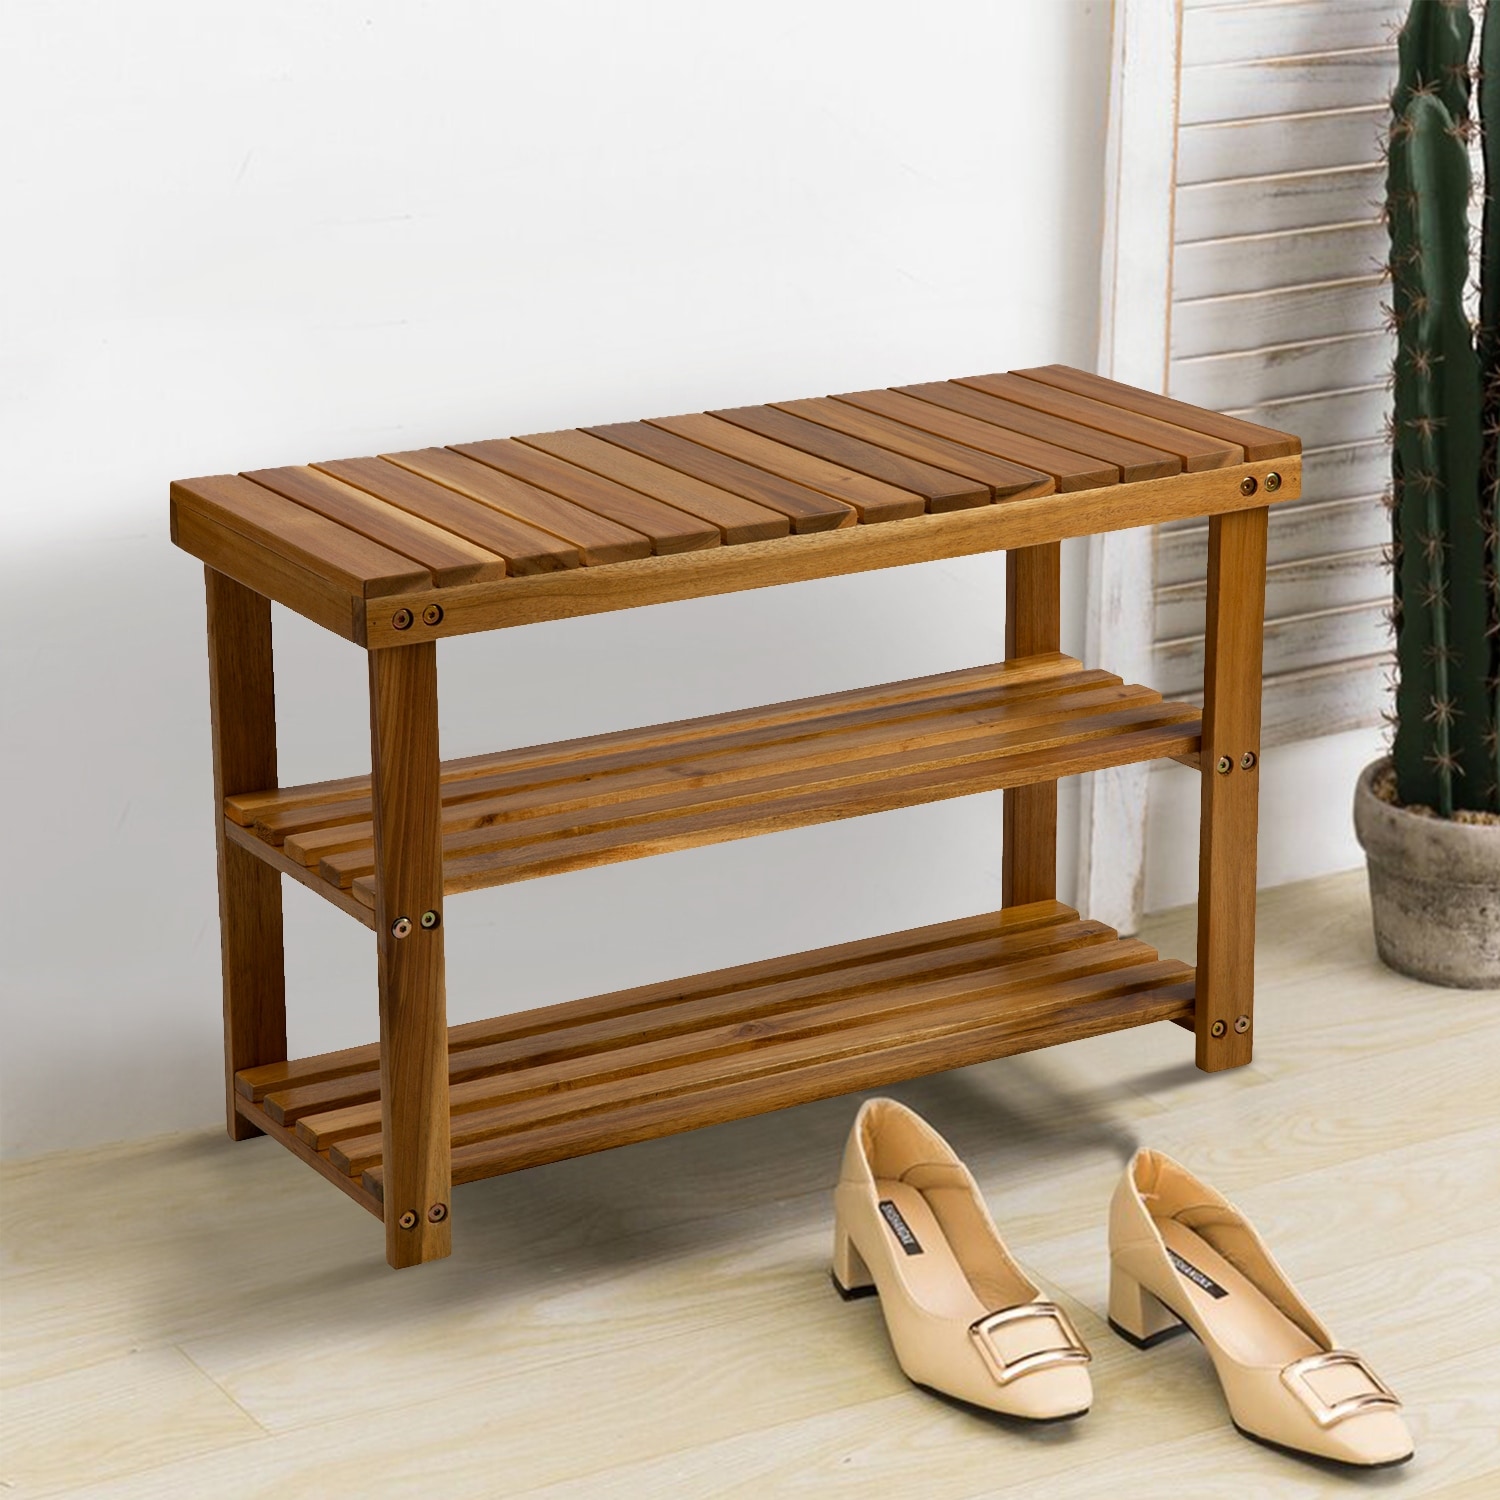 https://ak1.ostkcdn.com/images/products/is/images/direct/52fd33f61e06e414a938ee9559d0969ec9cf2bf2/Acacia-Wood-Shoe-Rack-Bench.jpg